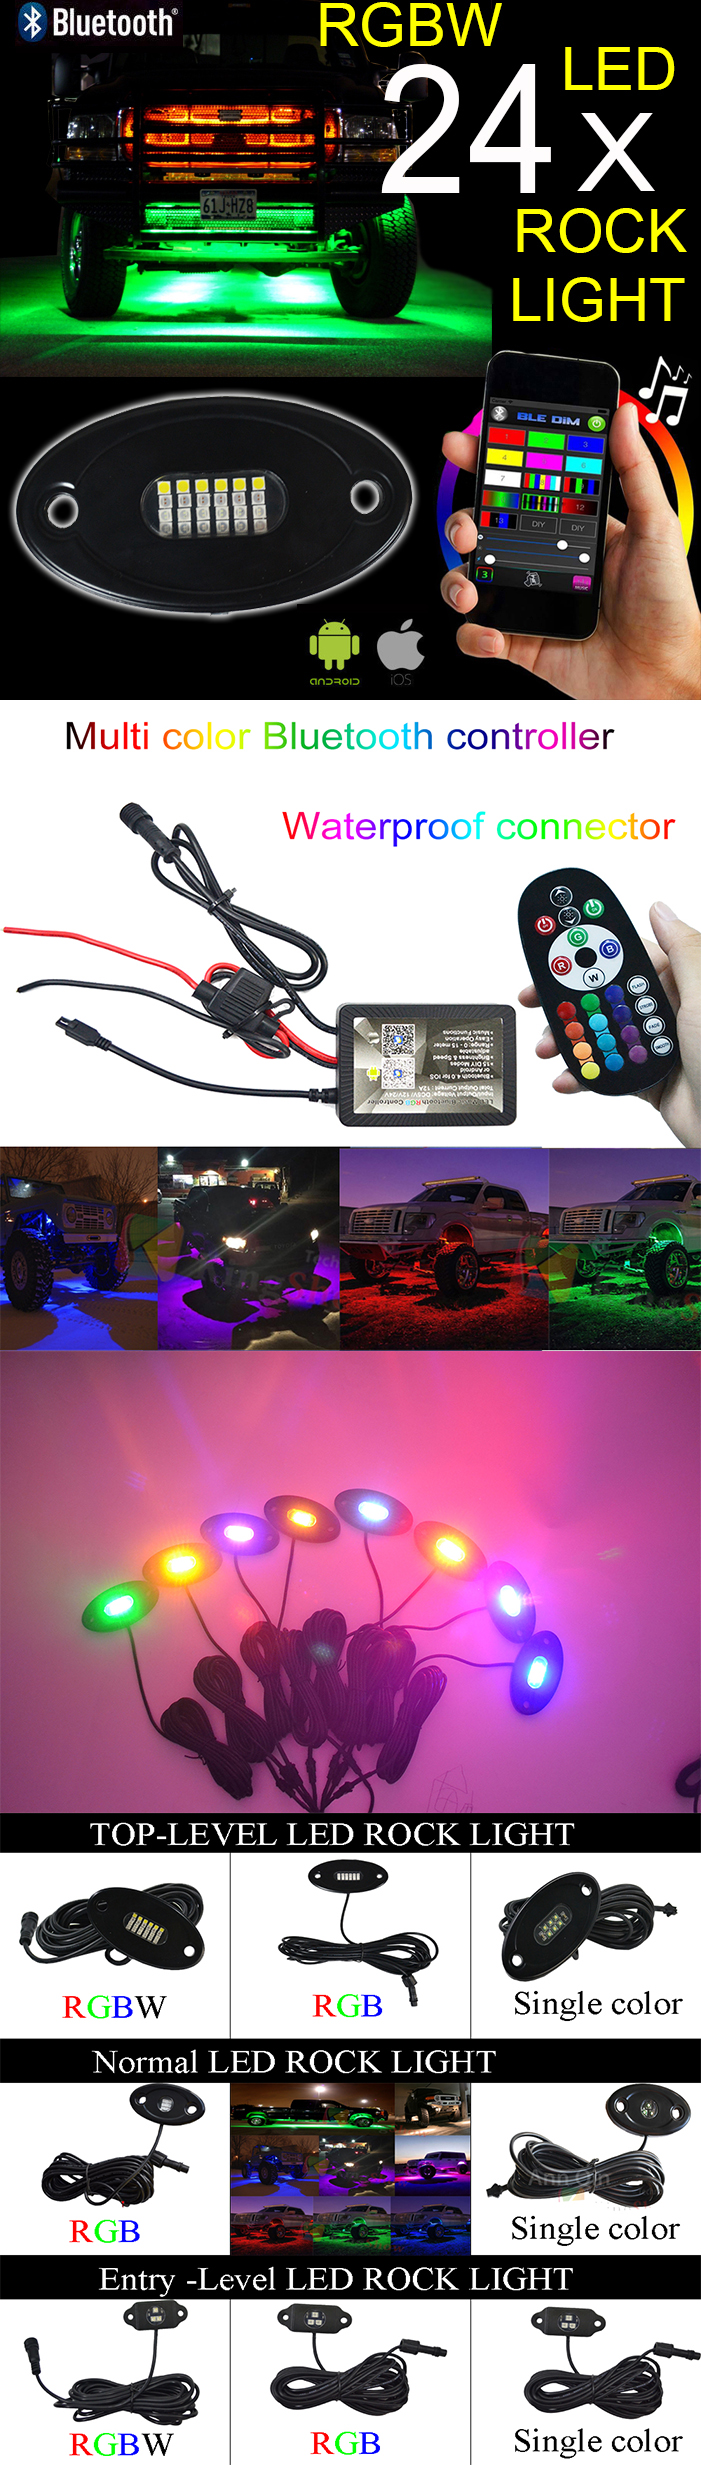 Blue-tooth LED Rock Light Kit With 4 Multi-Color + White (RGBW) Pods